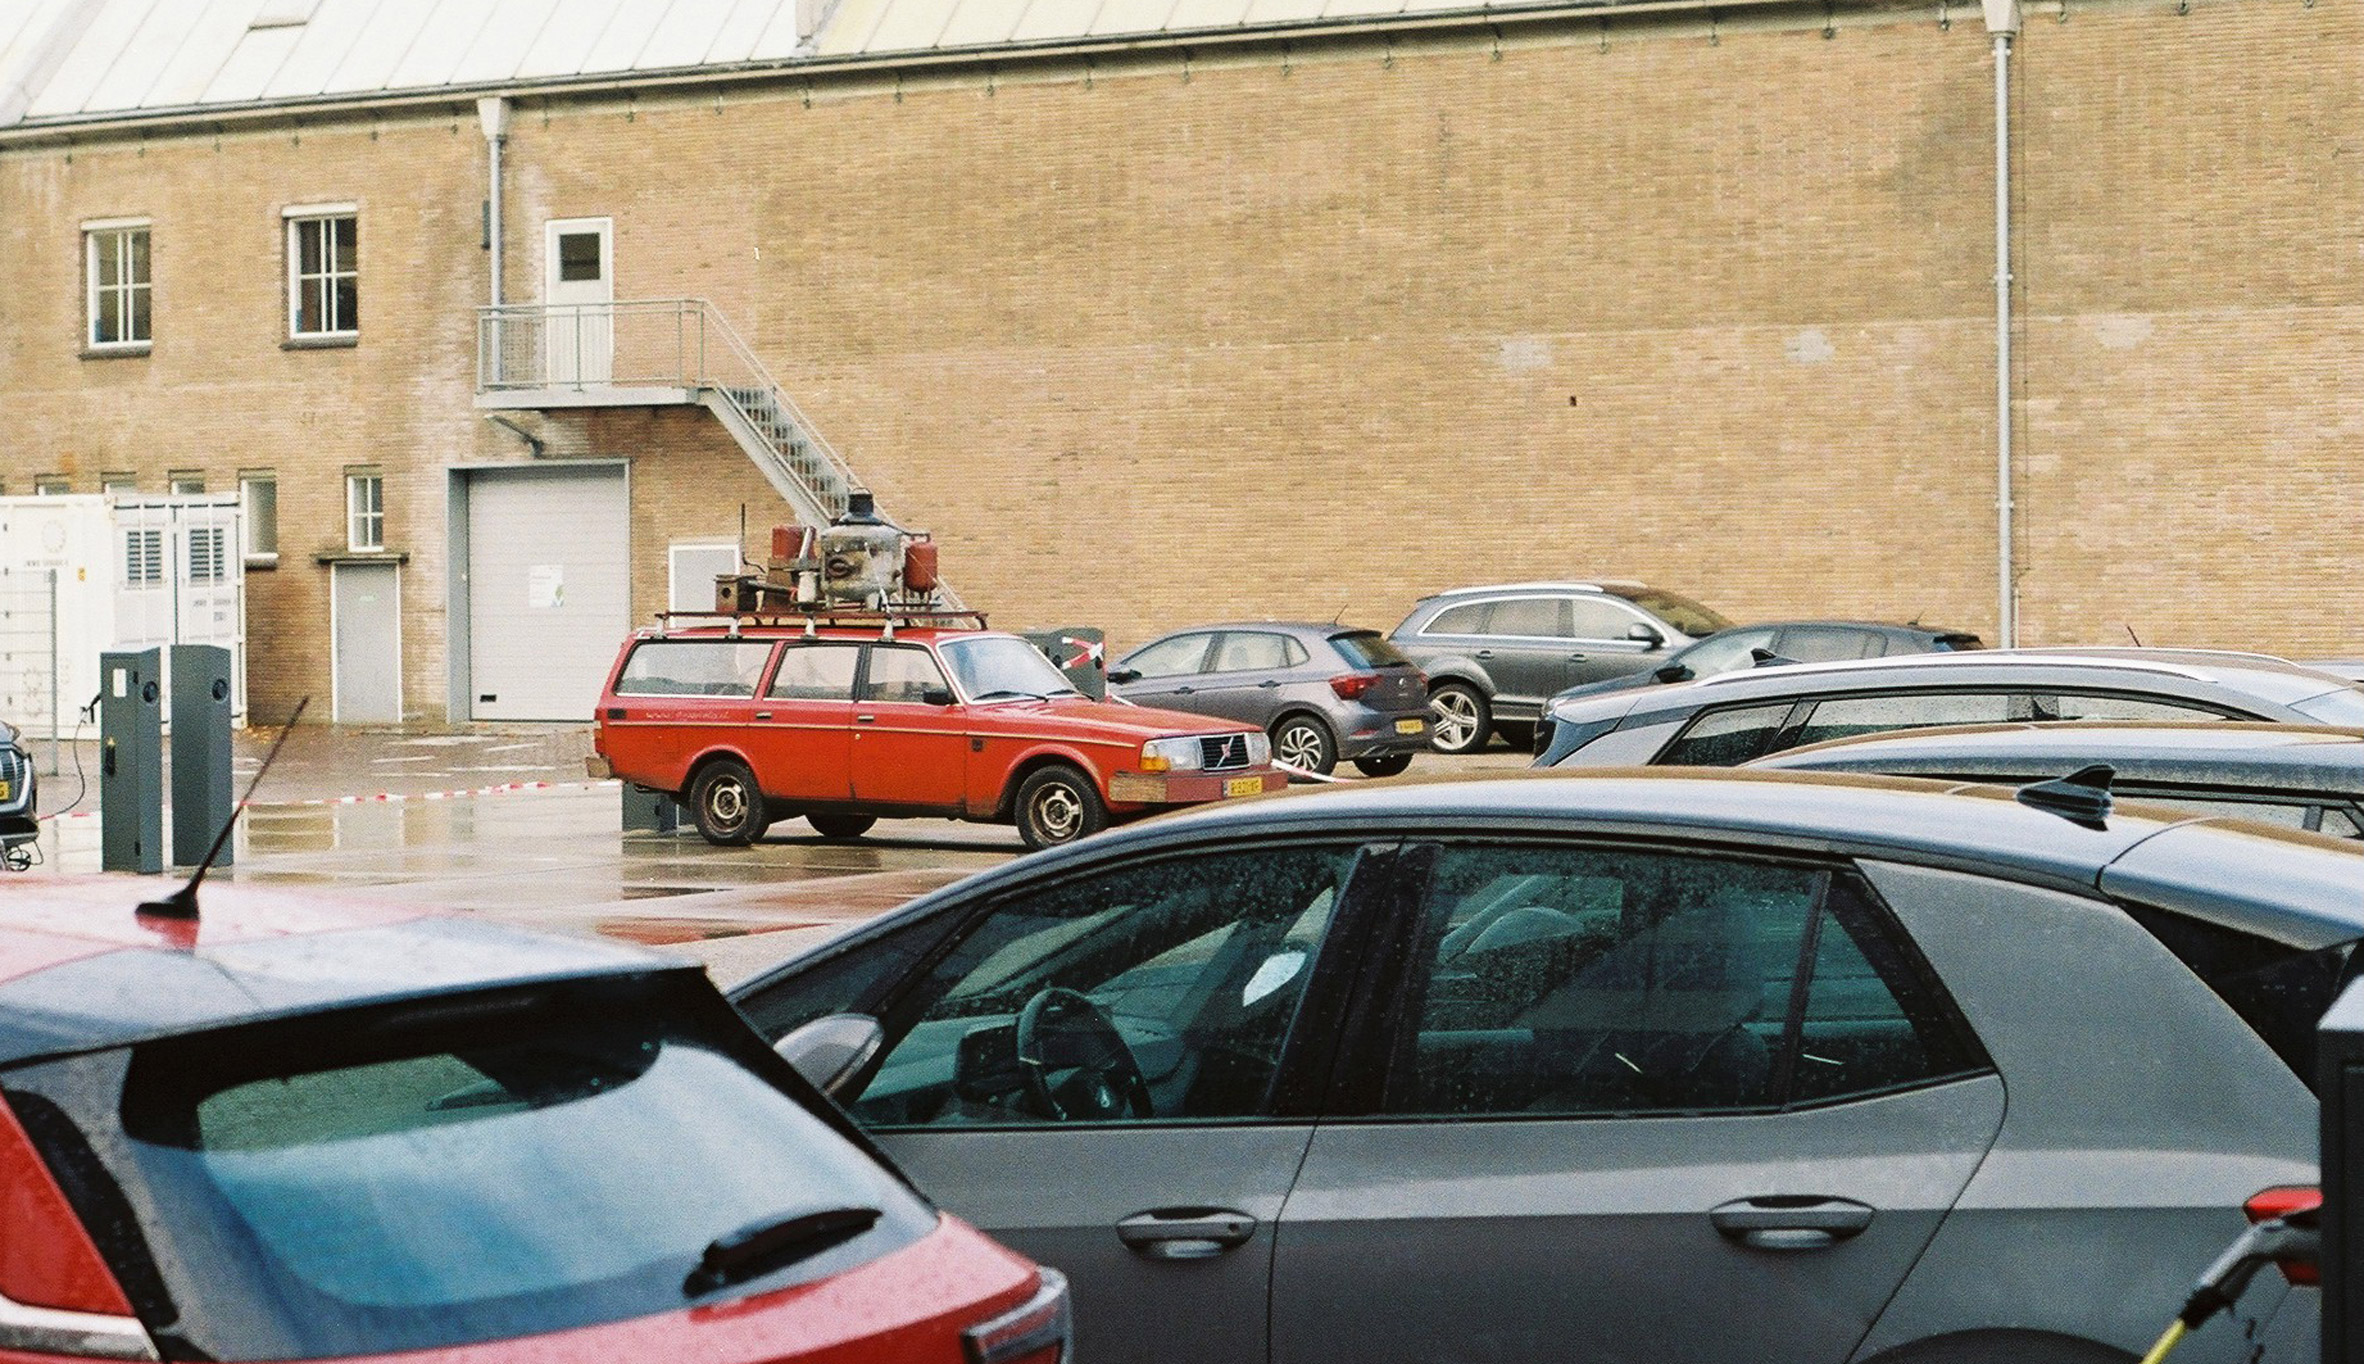 Photo of the Plastic Car taken from a distance across a car park